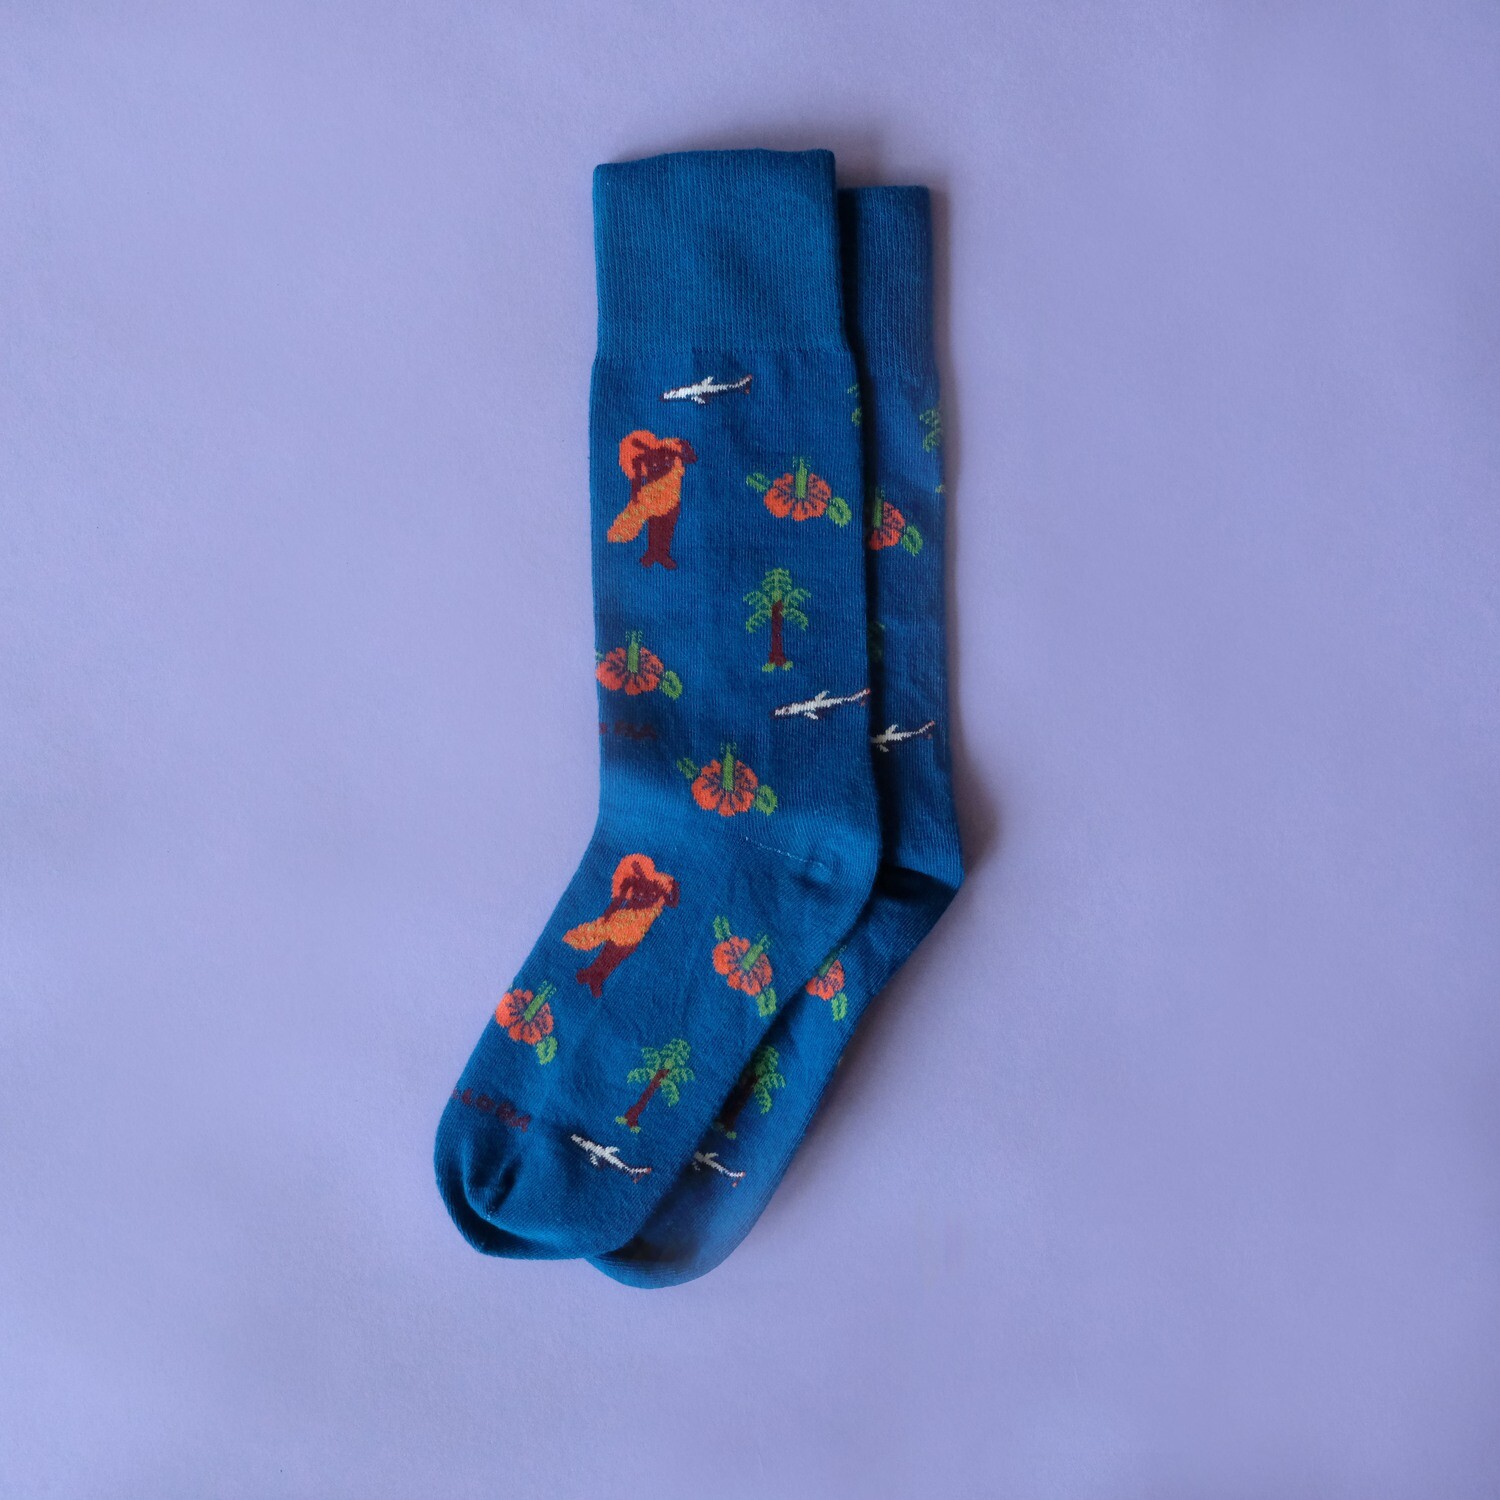 Limited Edition - Aloha Socks by Bruno Levy